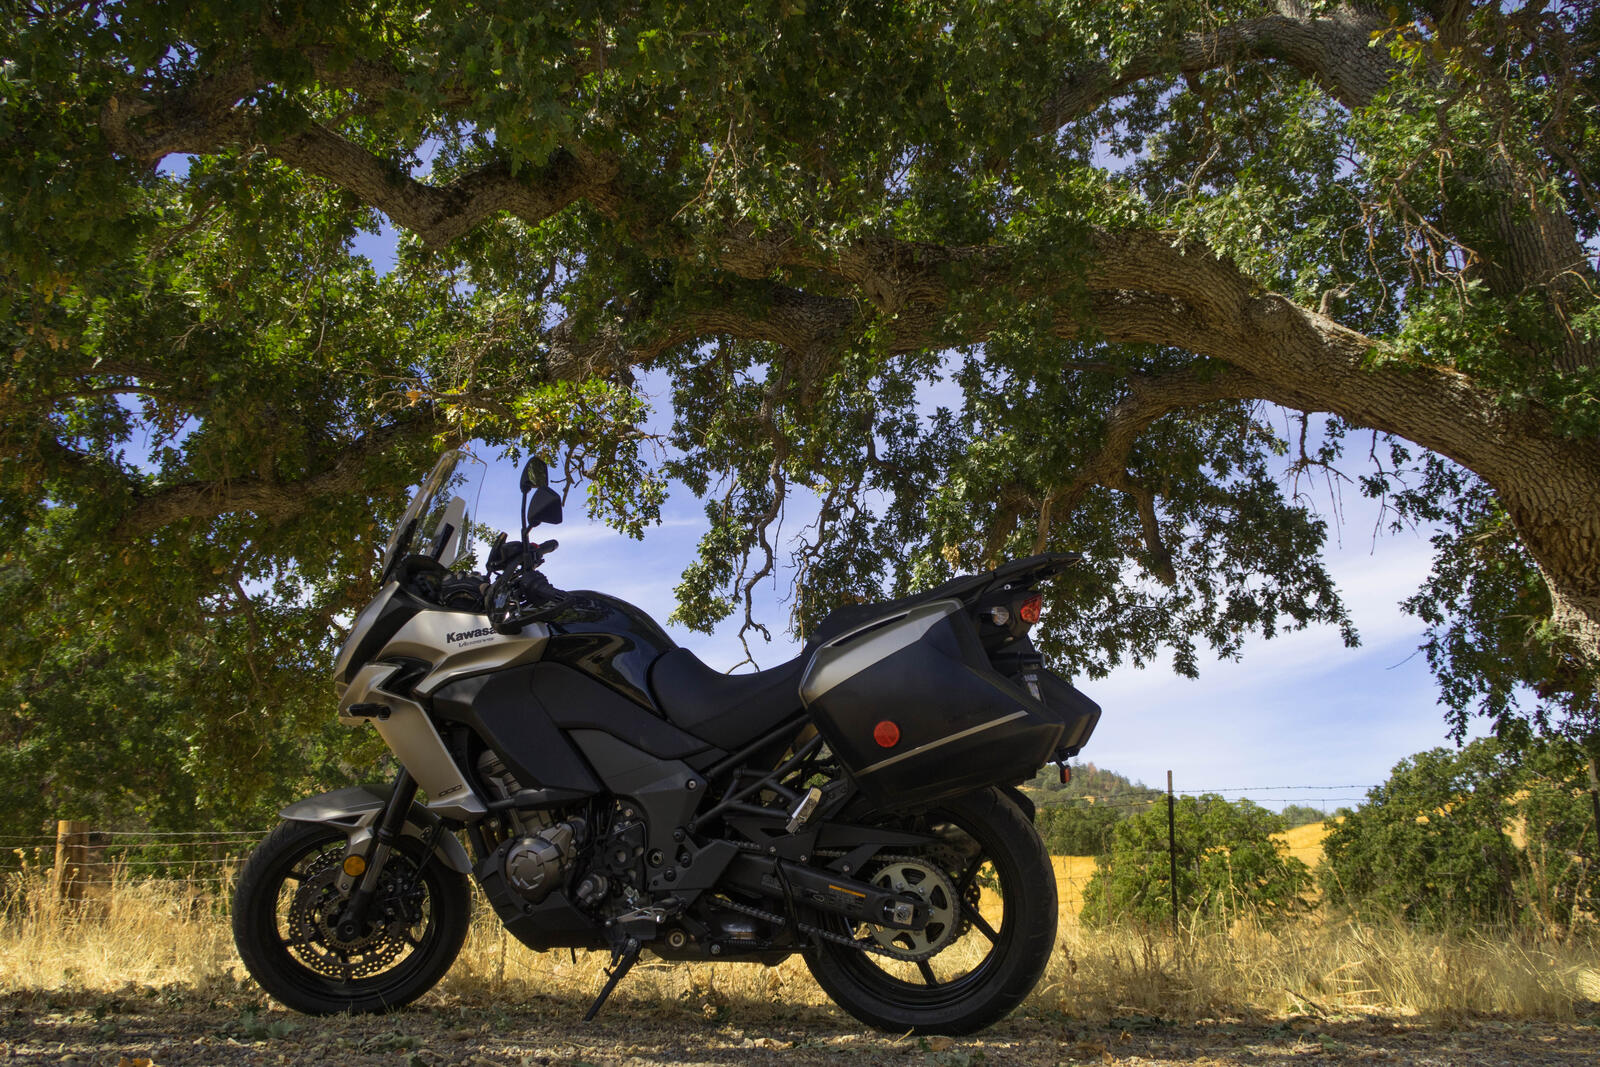 Free photo Black Kawasaki motorcycle parked in the shade under tree branches